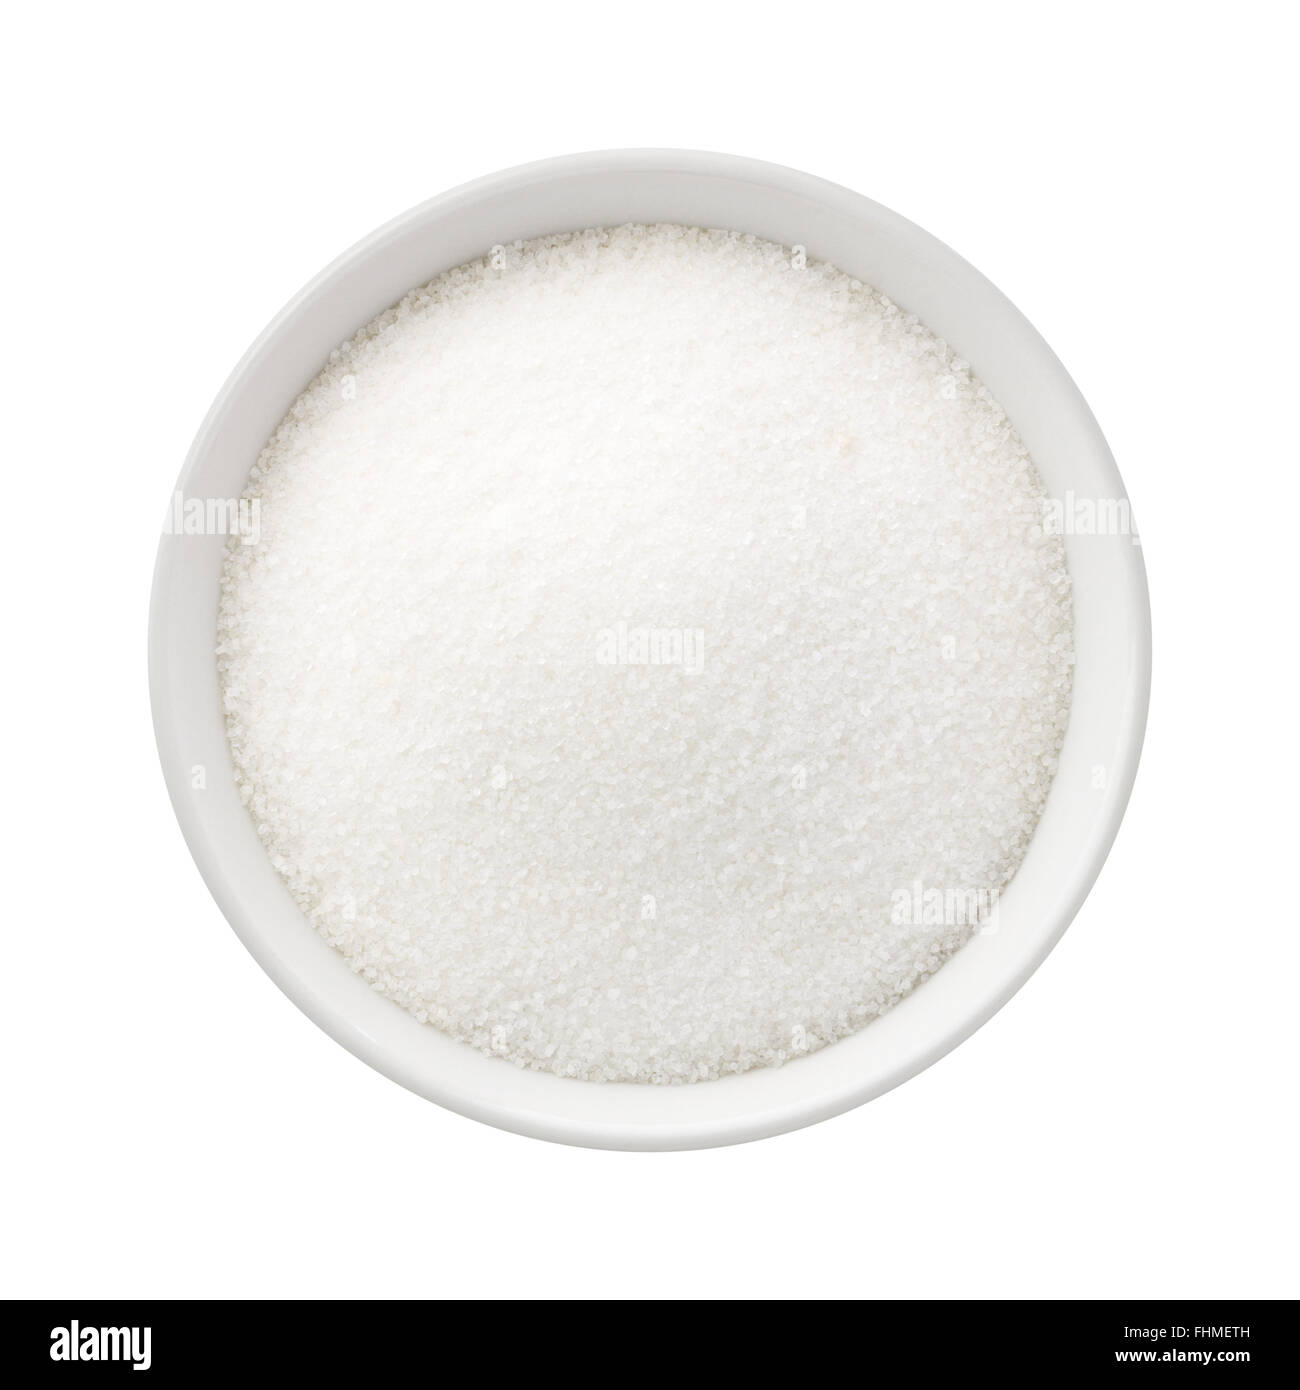 Refined Sugar in a Ceramic Bowl. The image is a cut out, isolated on a white background. Stock Photo